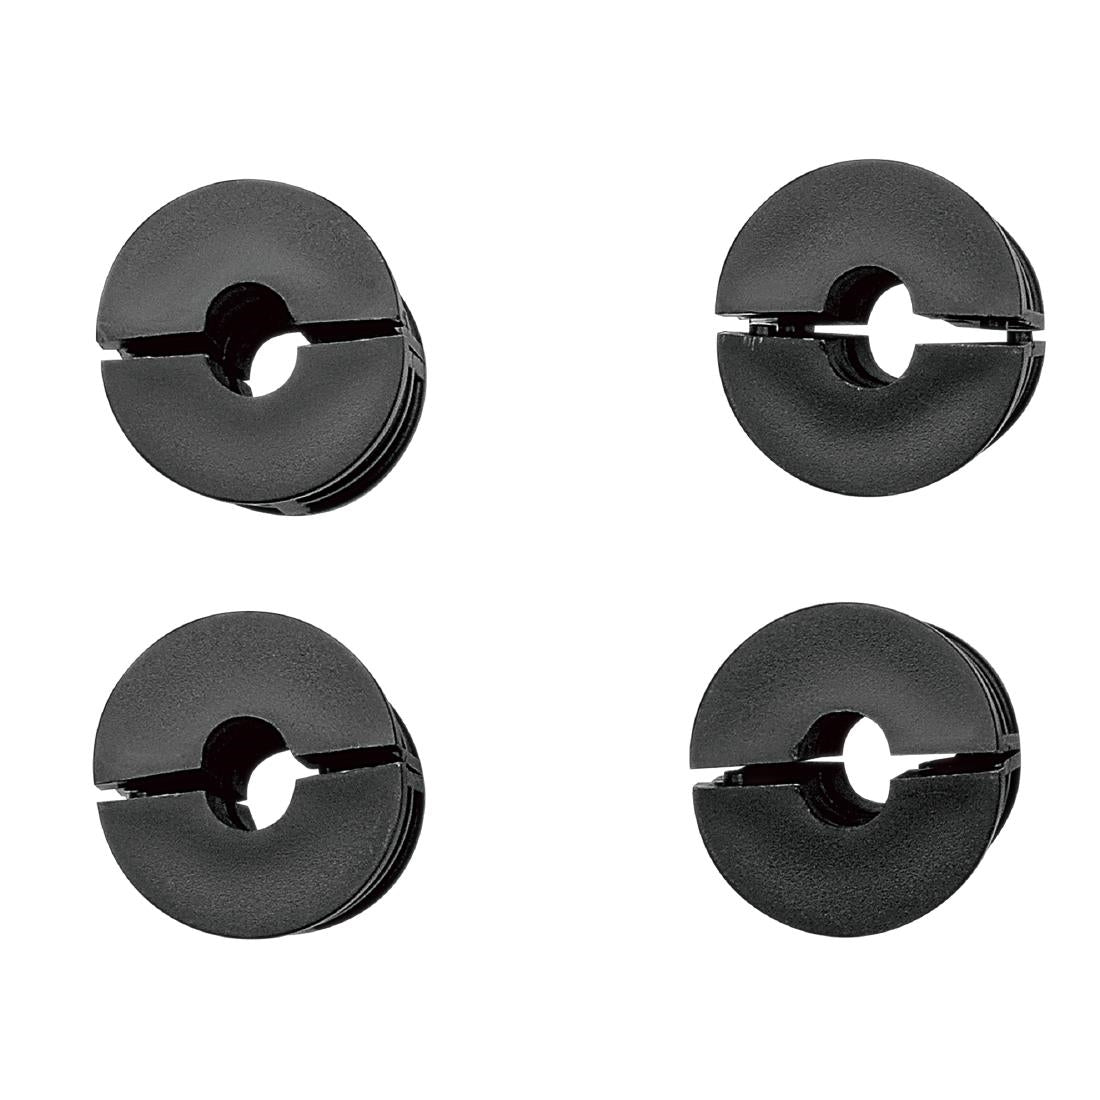 Vogue Castors for Vogue Stainless Steel Tables (Pack of 4)